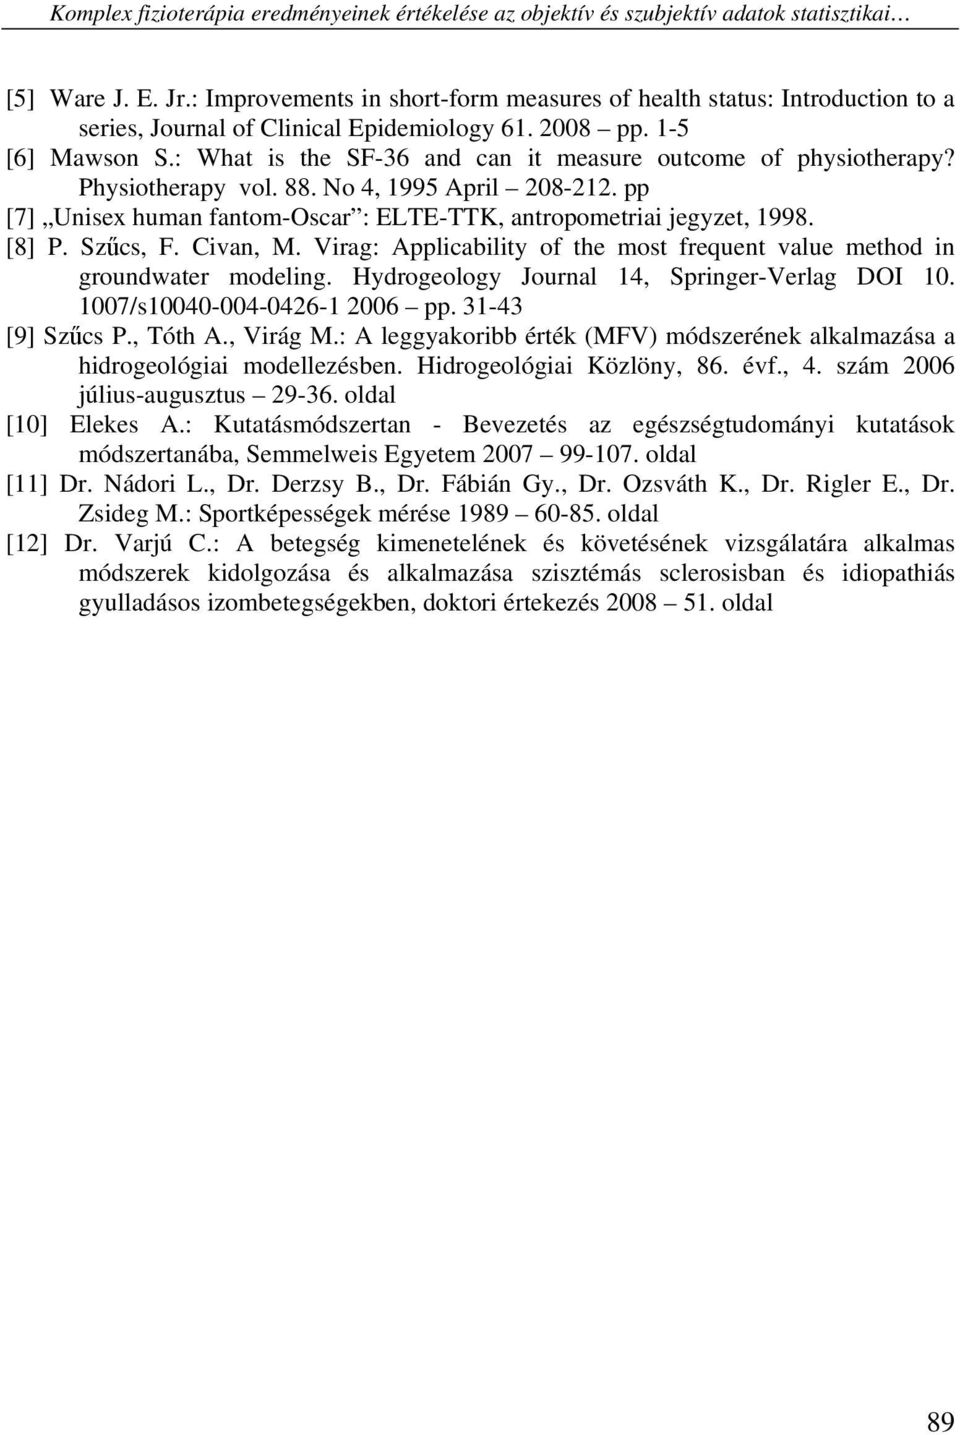 : What is the SF-36 and can it measure outcome of physiotherapy? Physiotherapy vol. 88. No 4, 1995 April 208-212. pp [7] Unisex human fantom-oscar : ELTE-TTK, antropometriai jegyzet, 1998. [8] P.